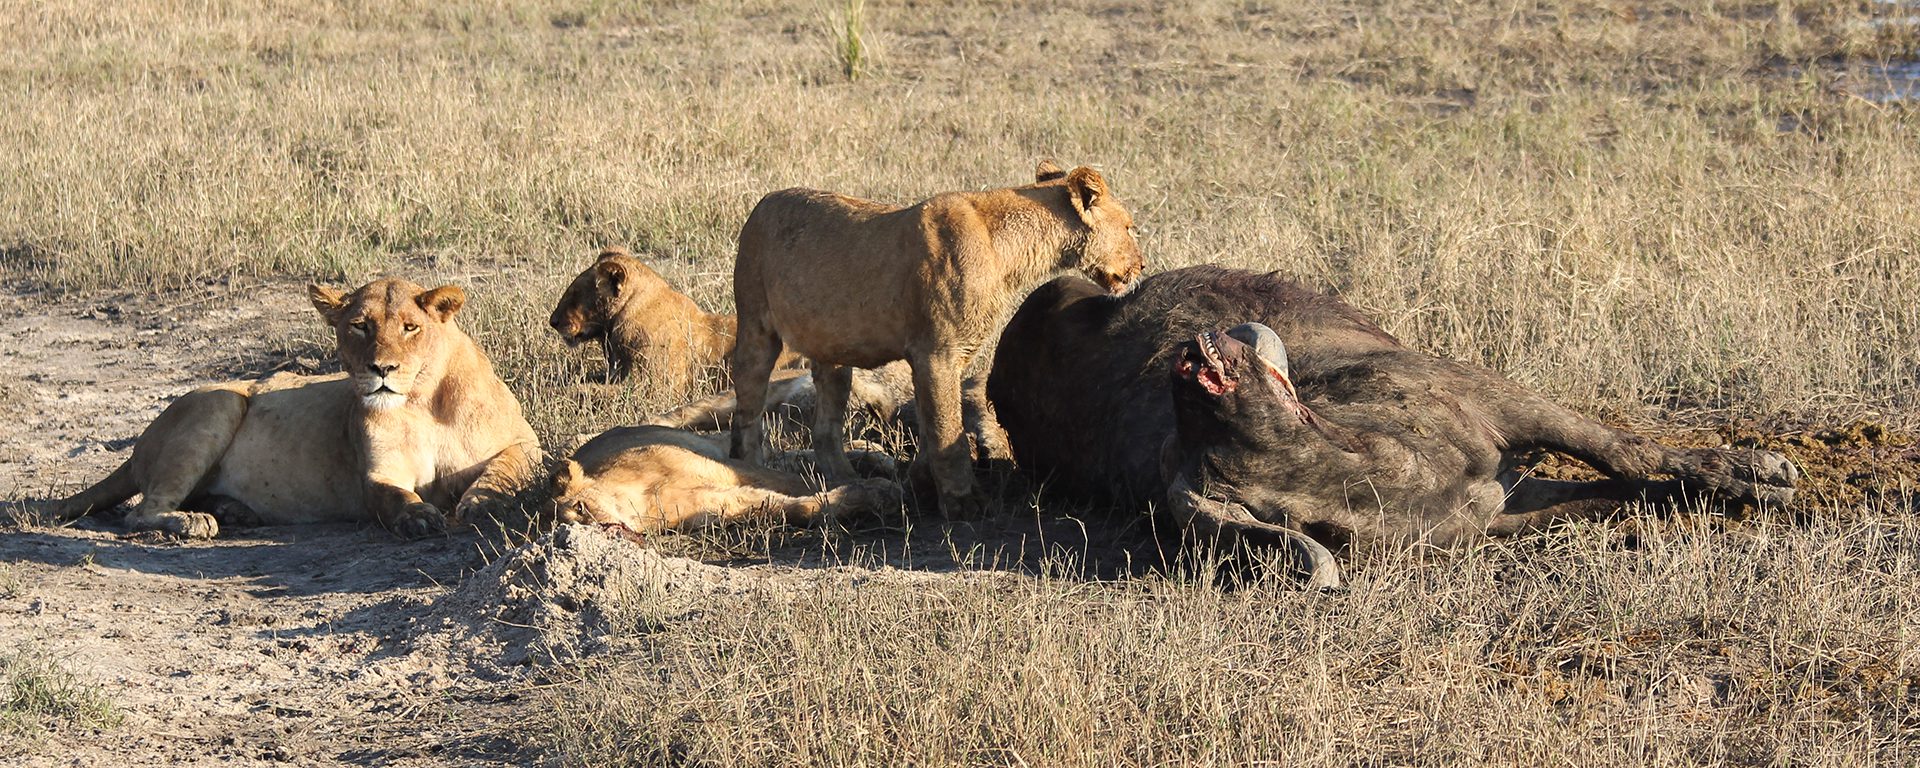 g2a_botswana_our-8-pack-and-their-morning-kill-a-buffalo-at-the-waters-edge-3_chobe